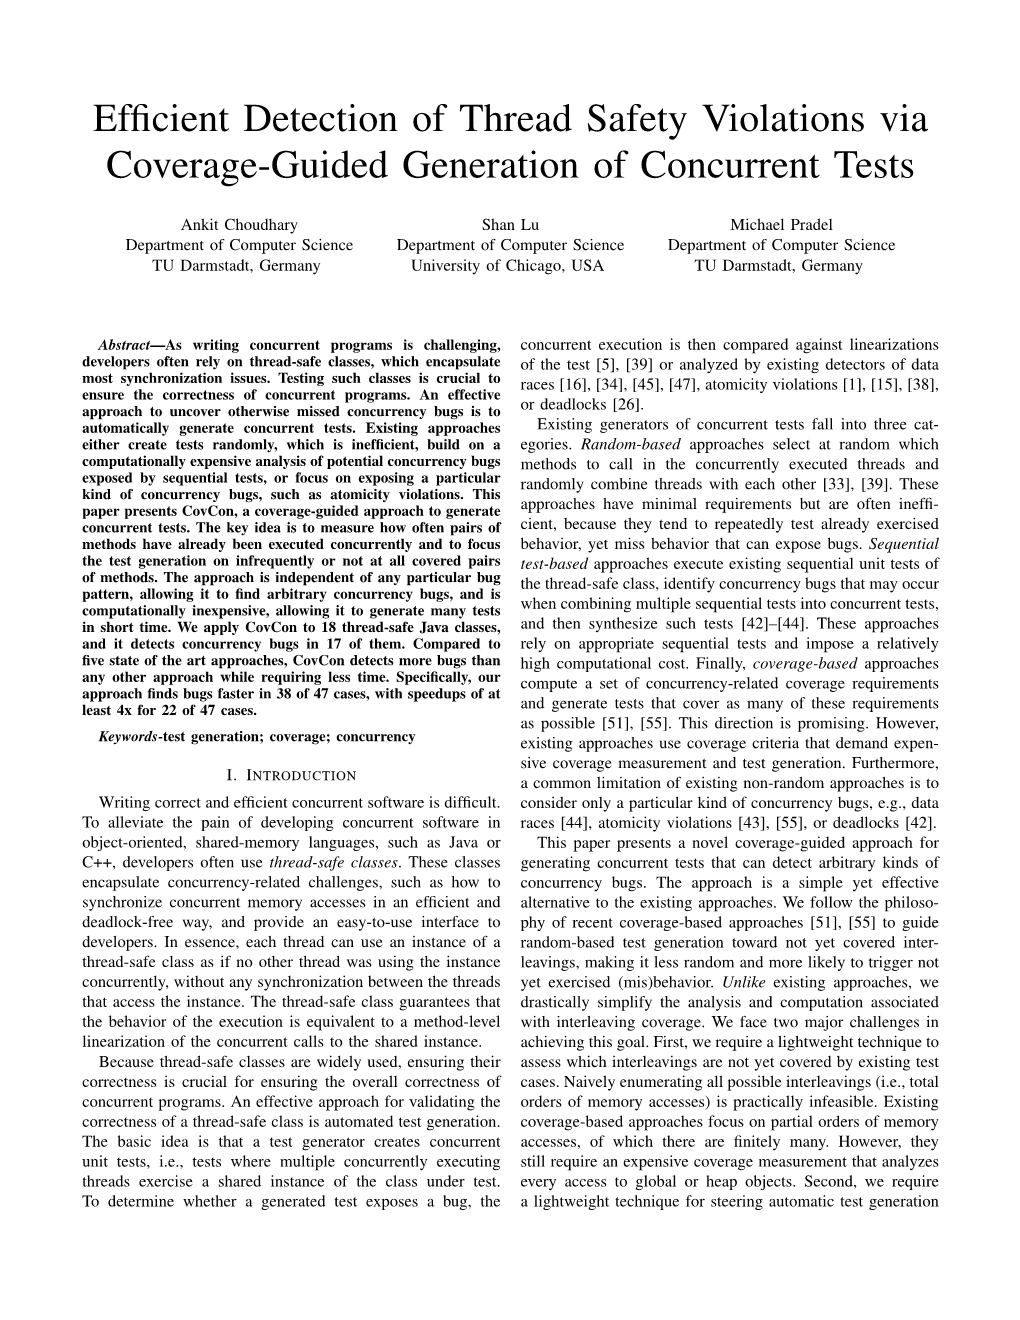 Efficient Detection of Thread Safety Violations Via Coverage-Guided